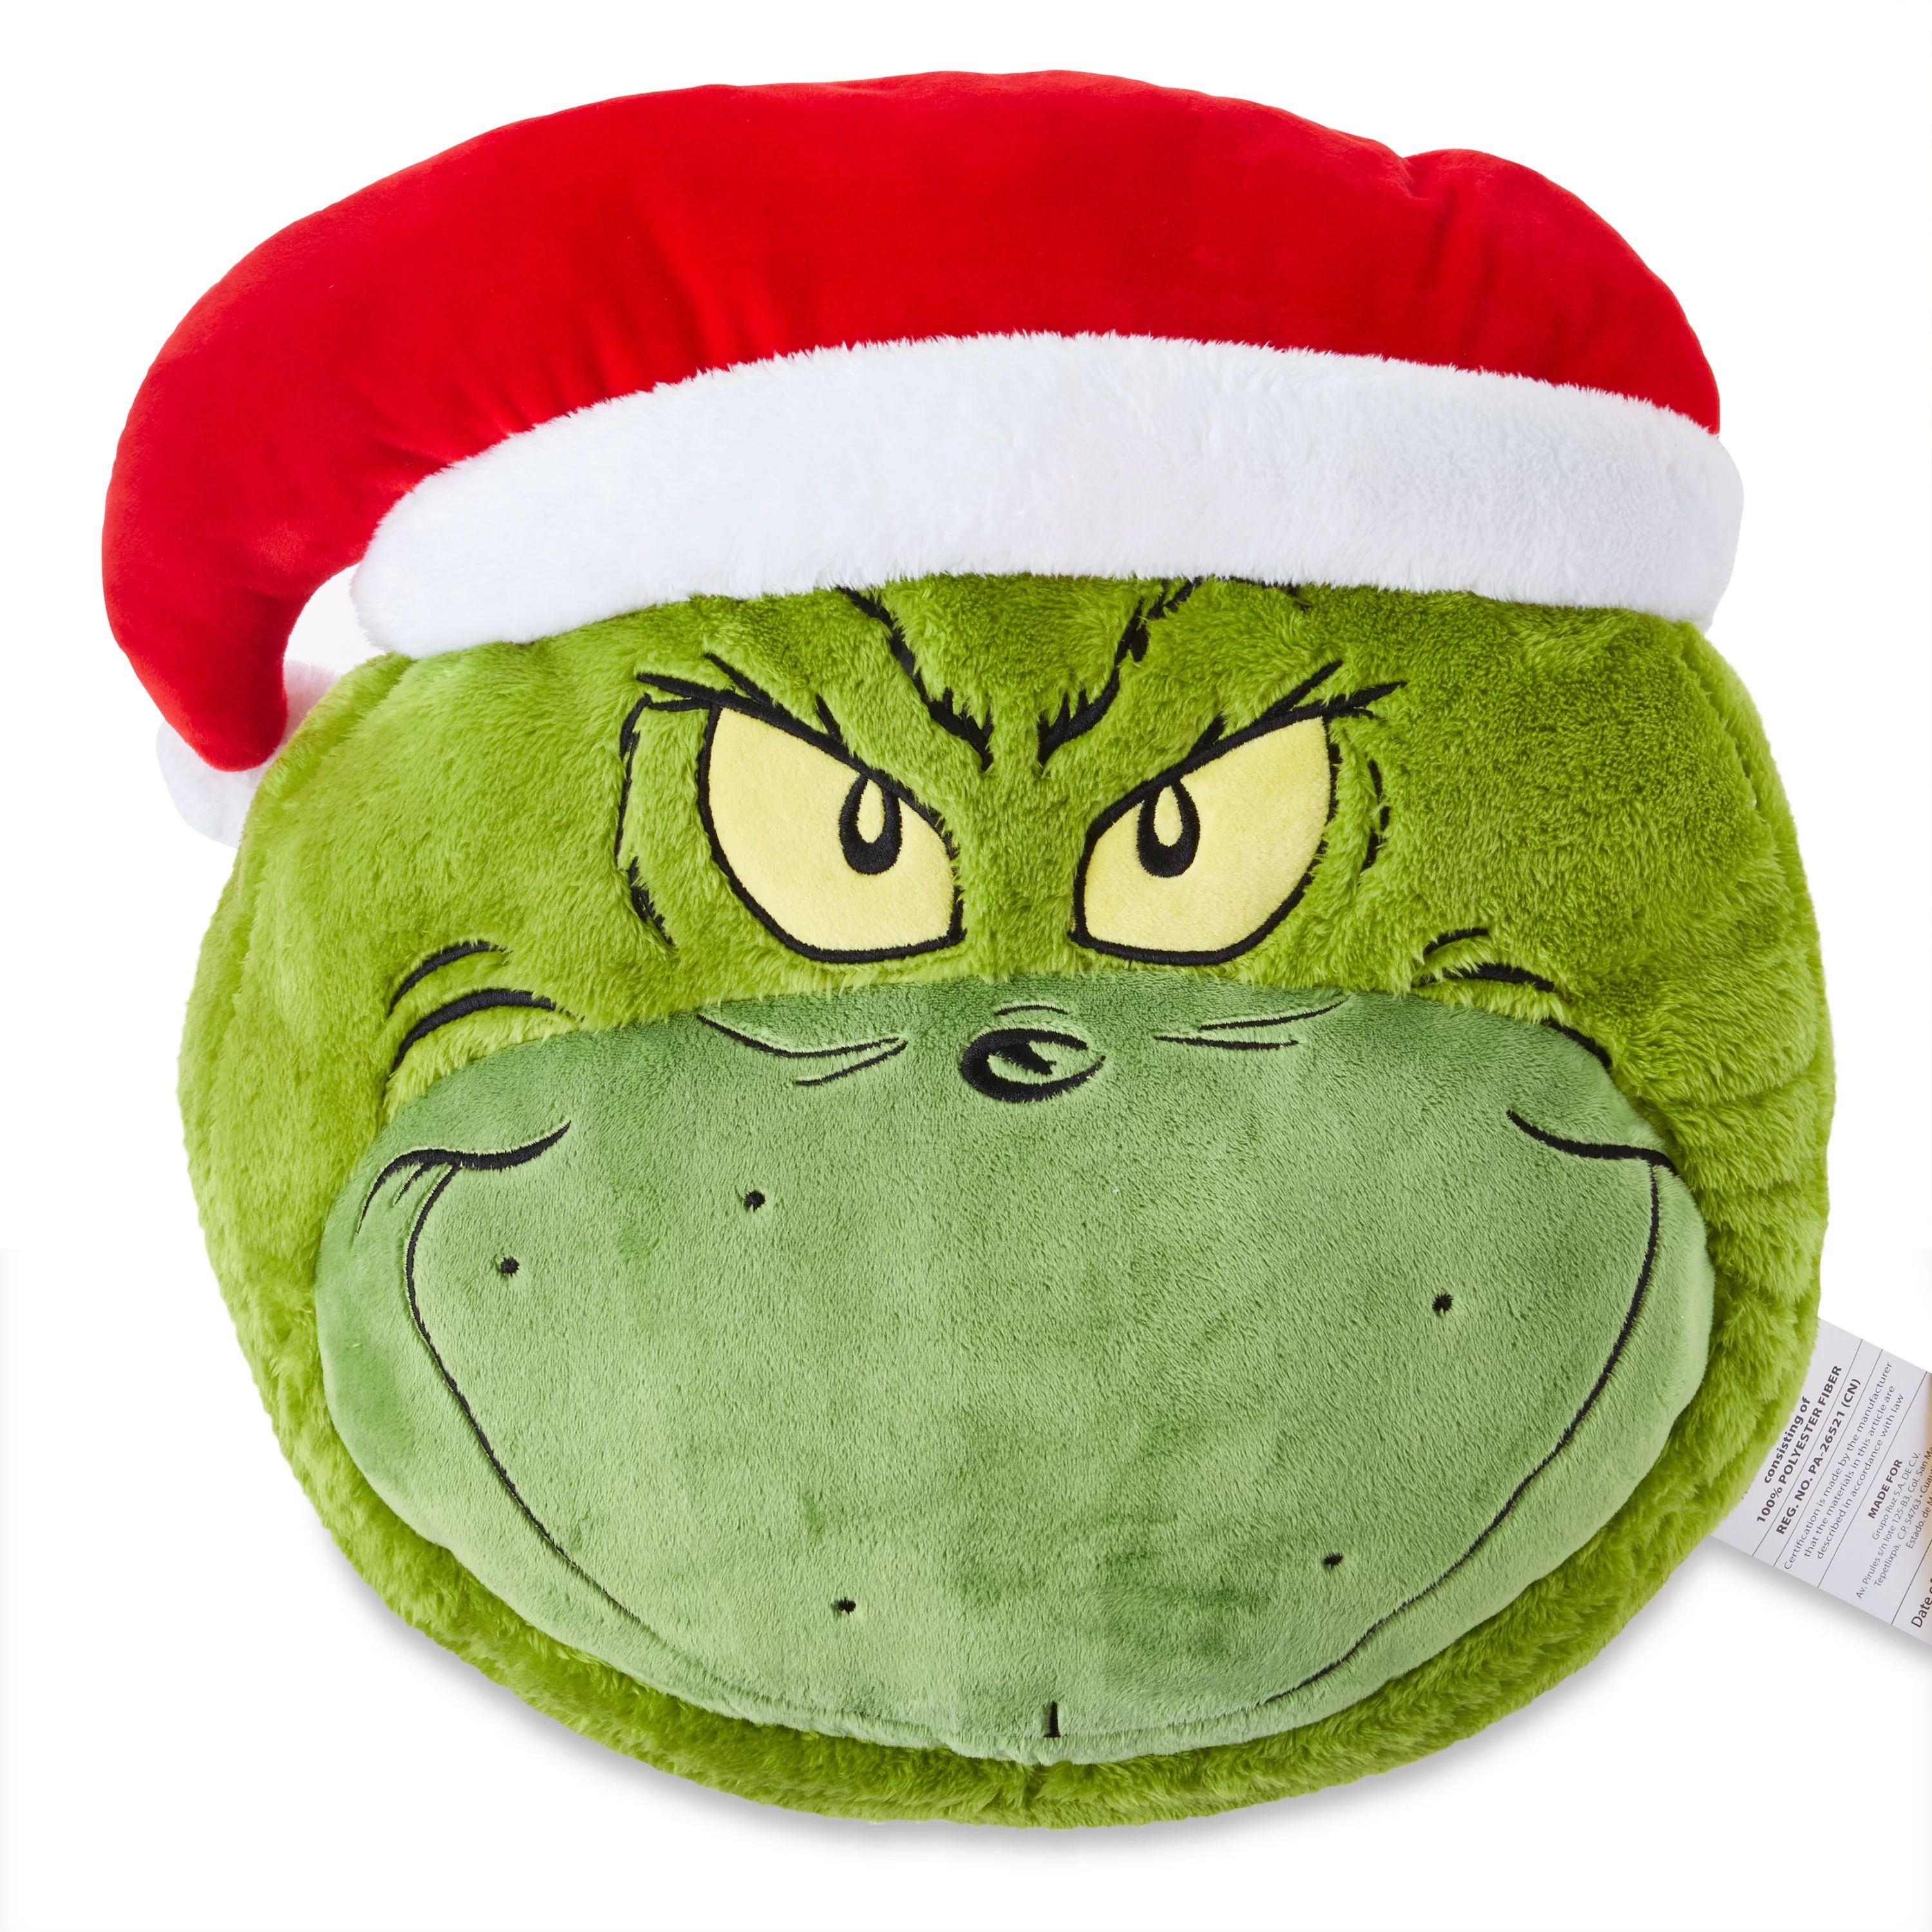 Dr Seuss' The Grinch Who Stole Christmas, Grinch Round Plush Pillow, 16 inches Tall | Walmart (US)